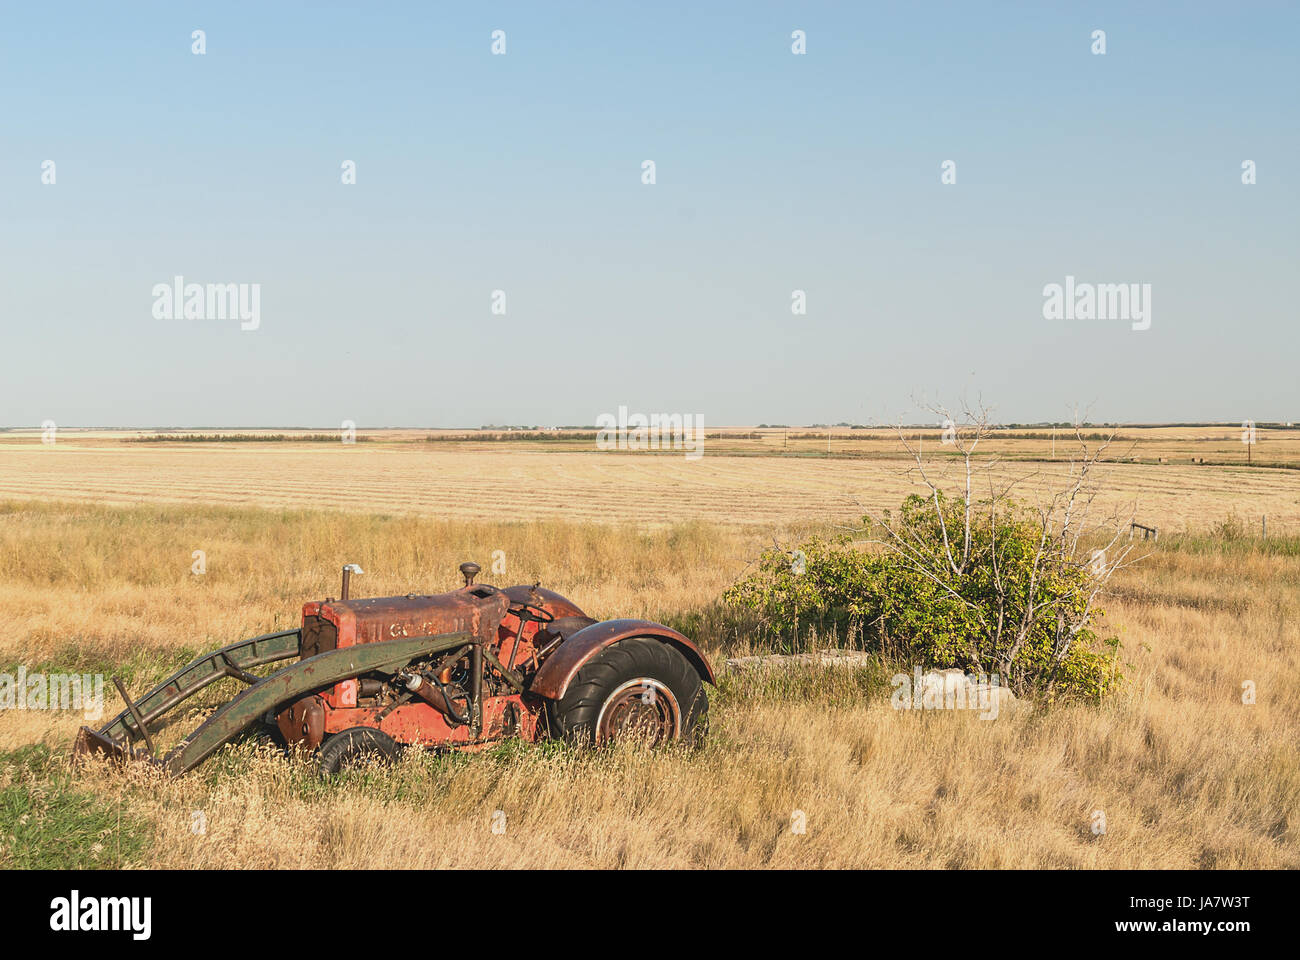 Farm equipment abandoned and rusting in field Stock Photo